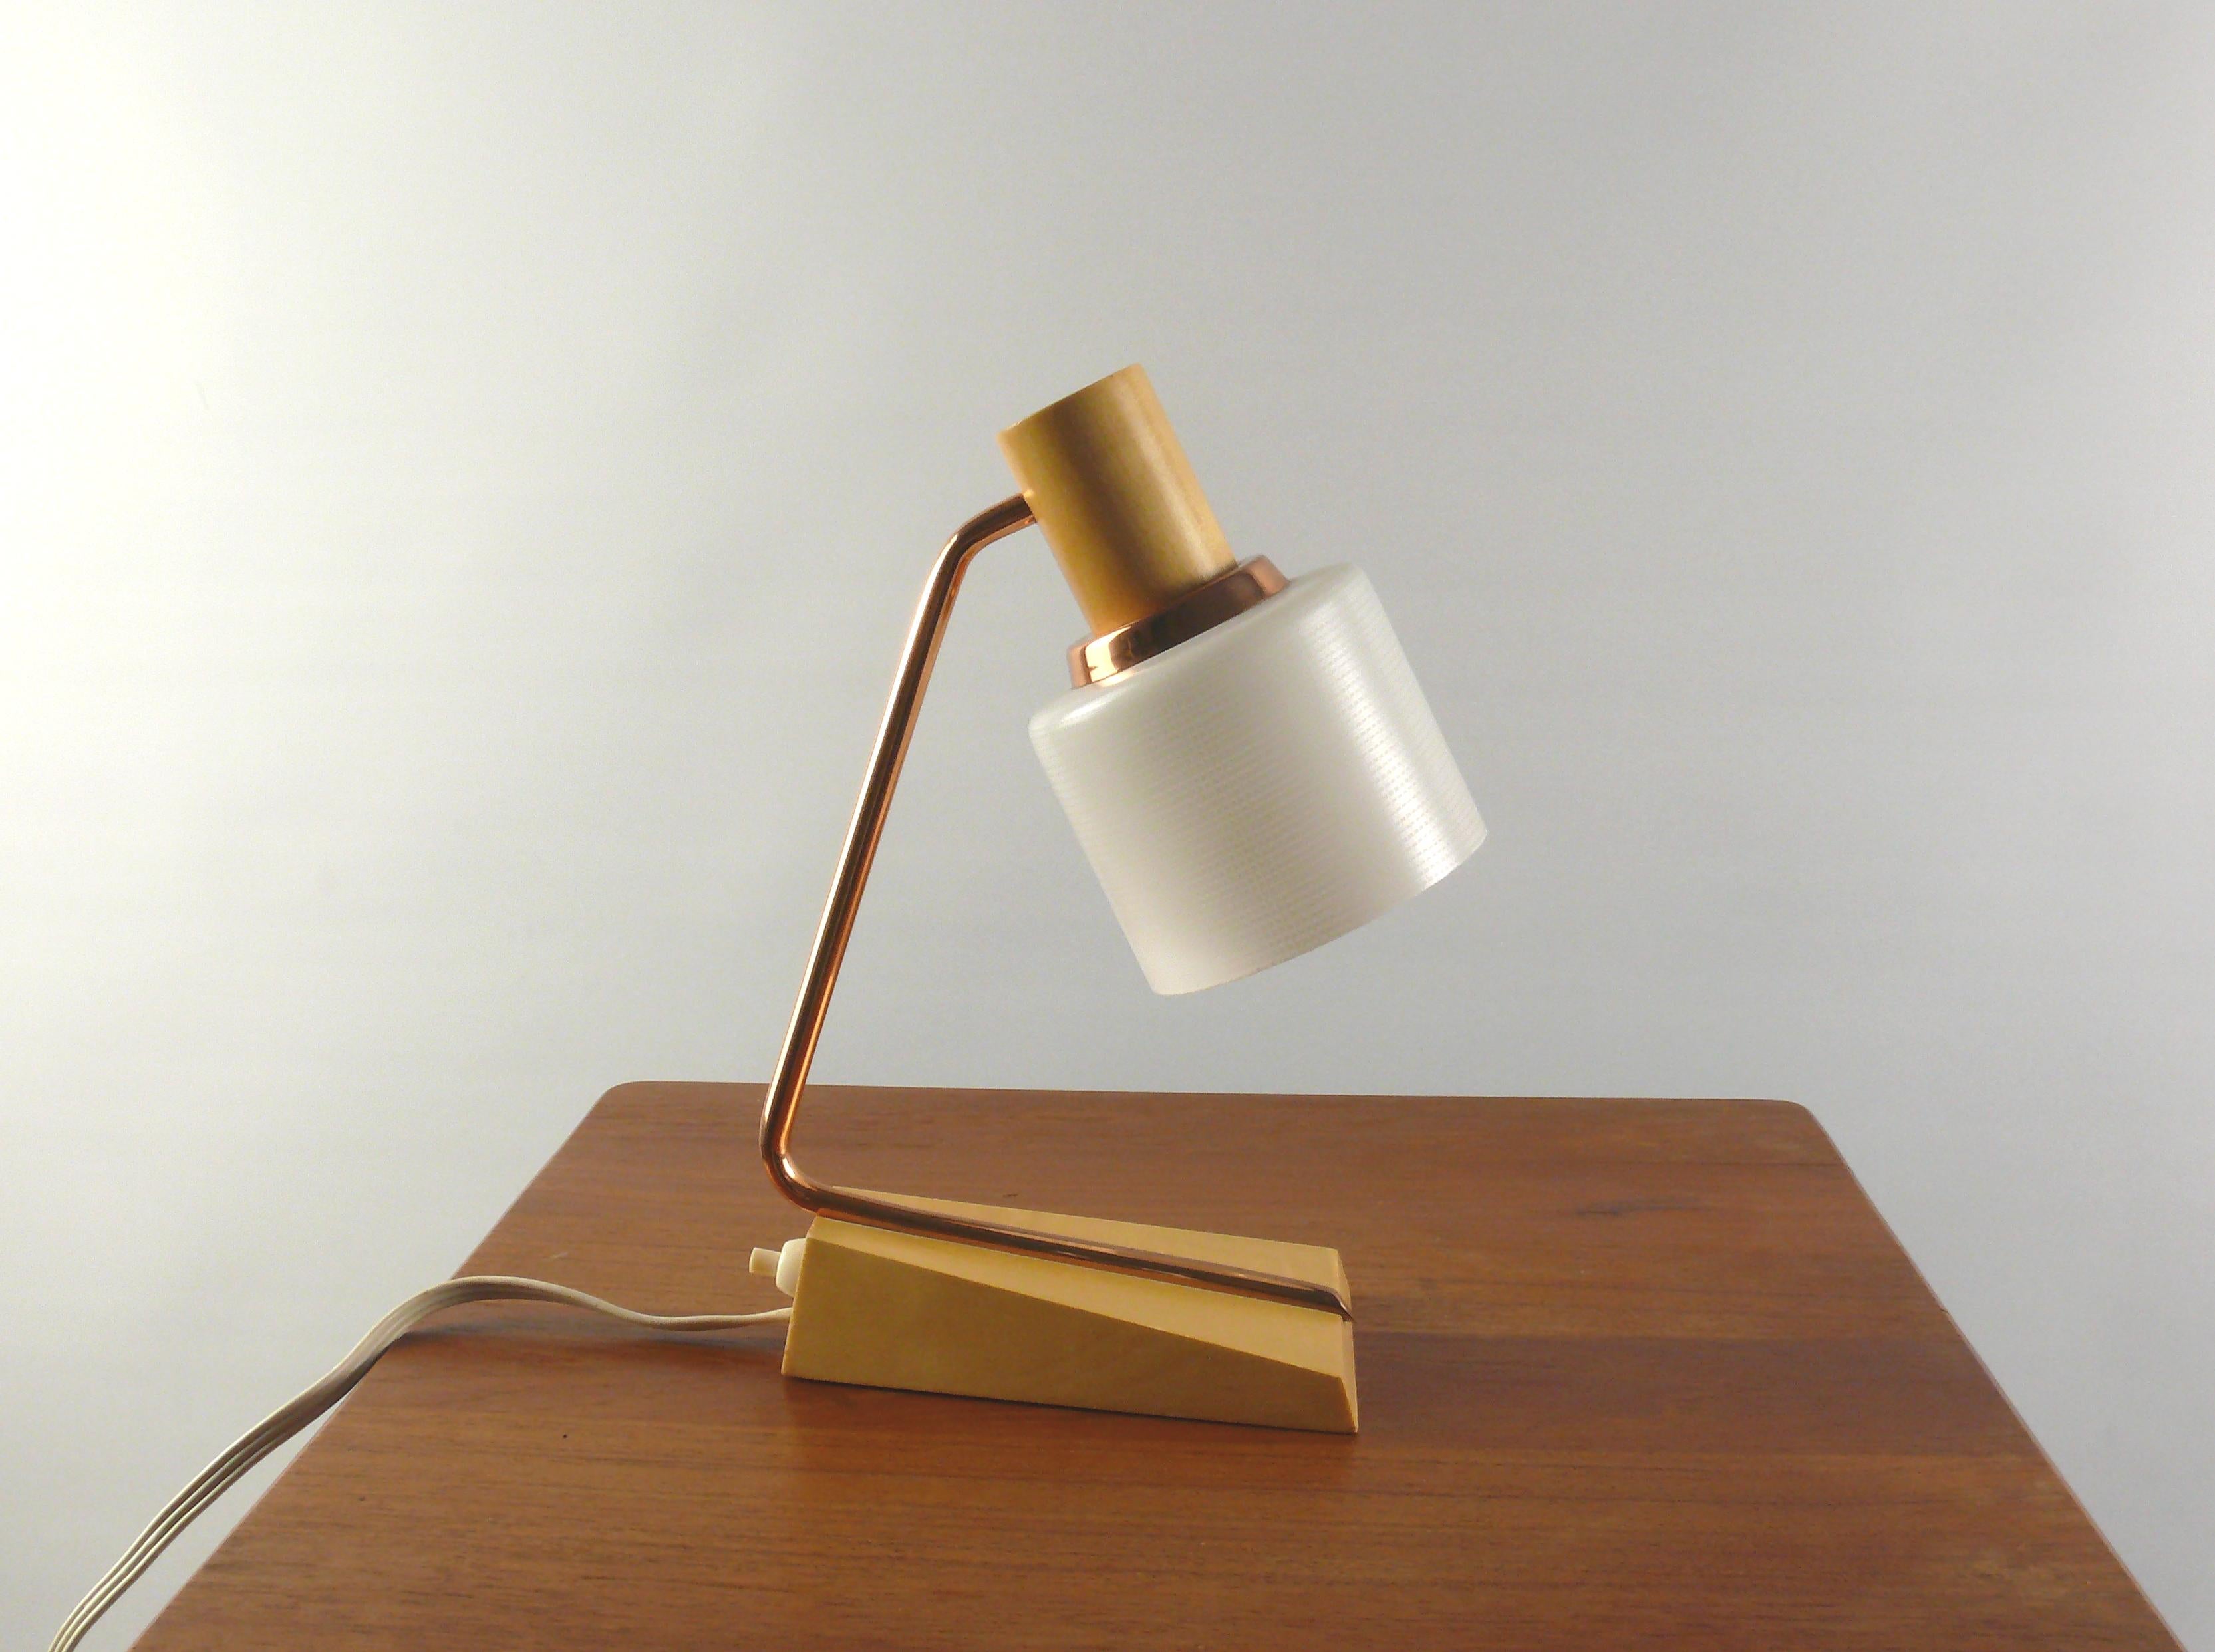 Very well preserved table lamp from the 1960s by TEMDE in Scandinavian style with a wooden base and wooden glass holder. The structured opal glass shade gives a beautiful, glare-free light. The copper arm is inserted into the wedge-shaped maple wood